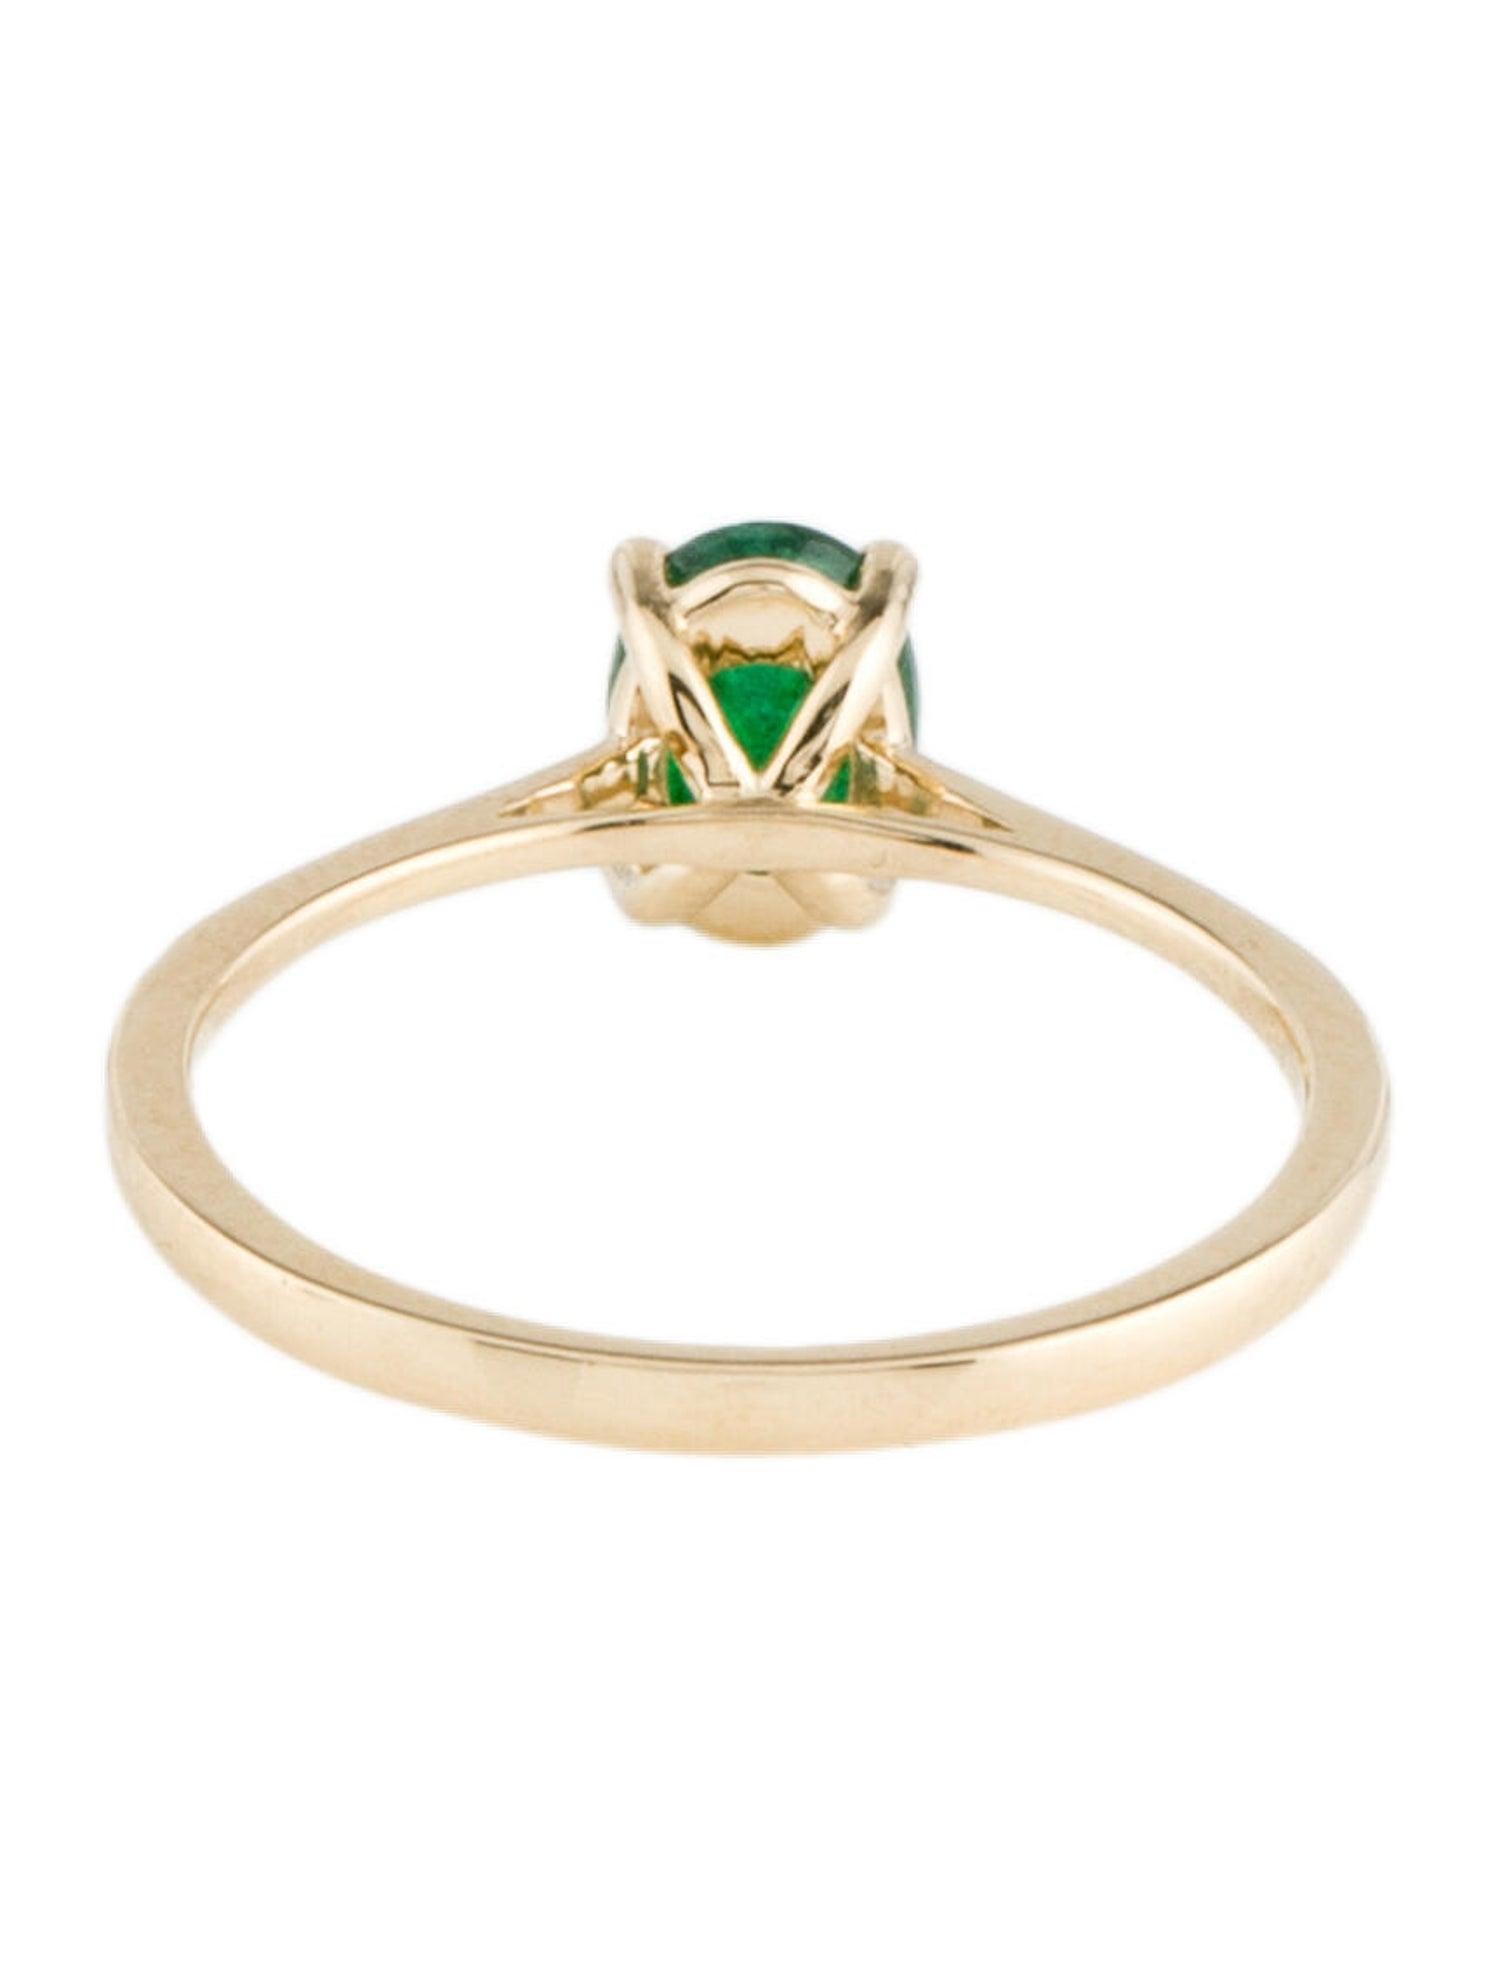 Brilliant Cut 14K Emerald Cocktail Ring - Size 7 - Timeless Elegance & Luxury Statement Piece For Sale